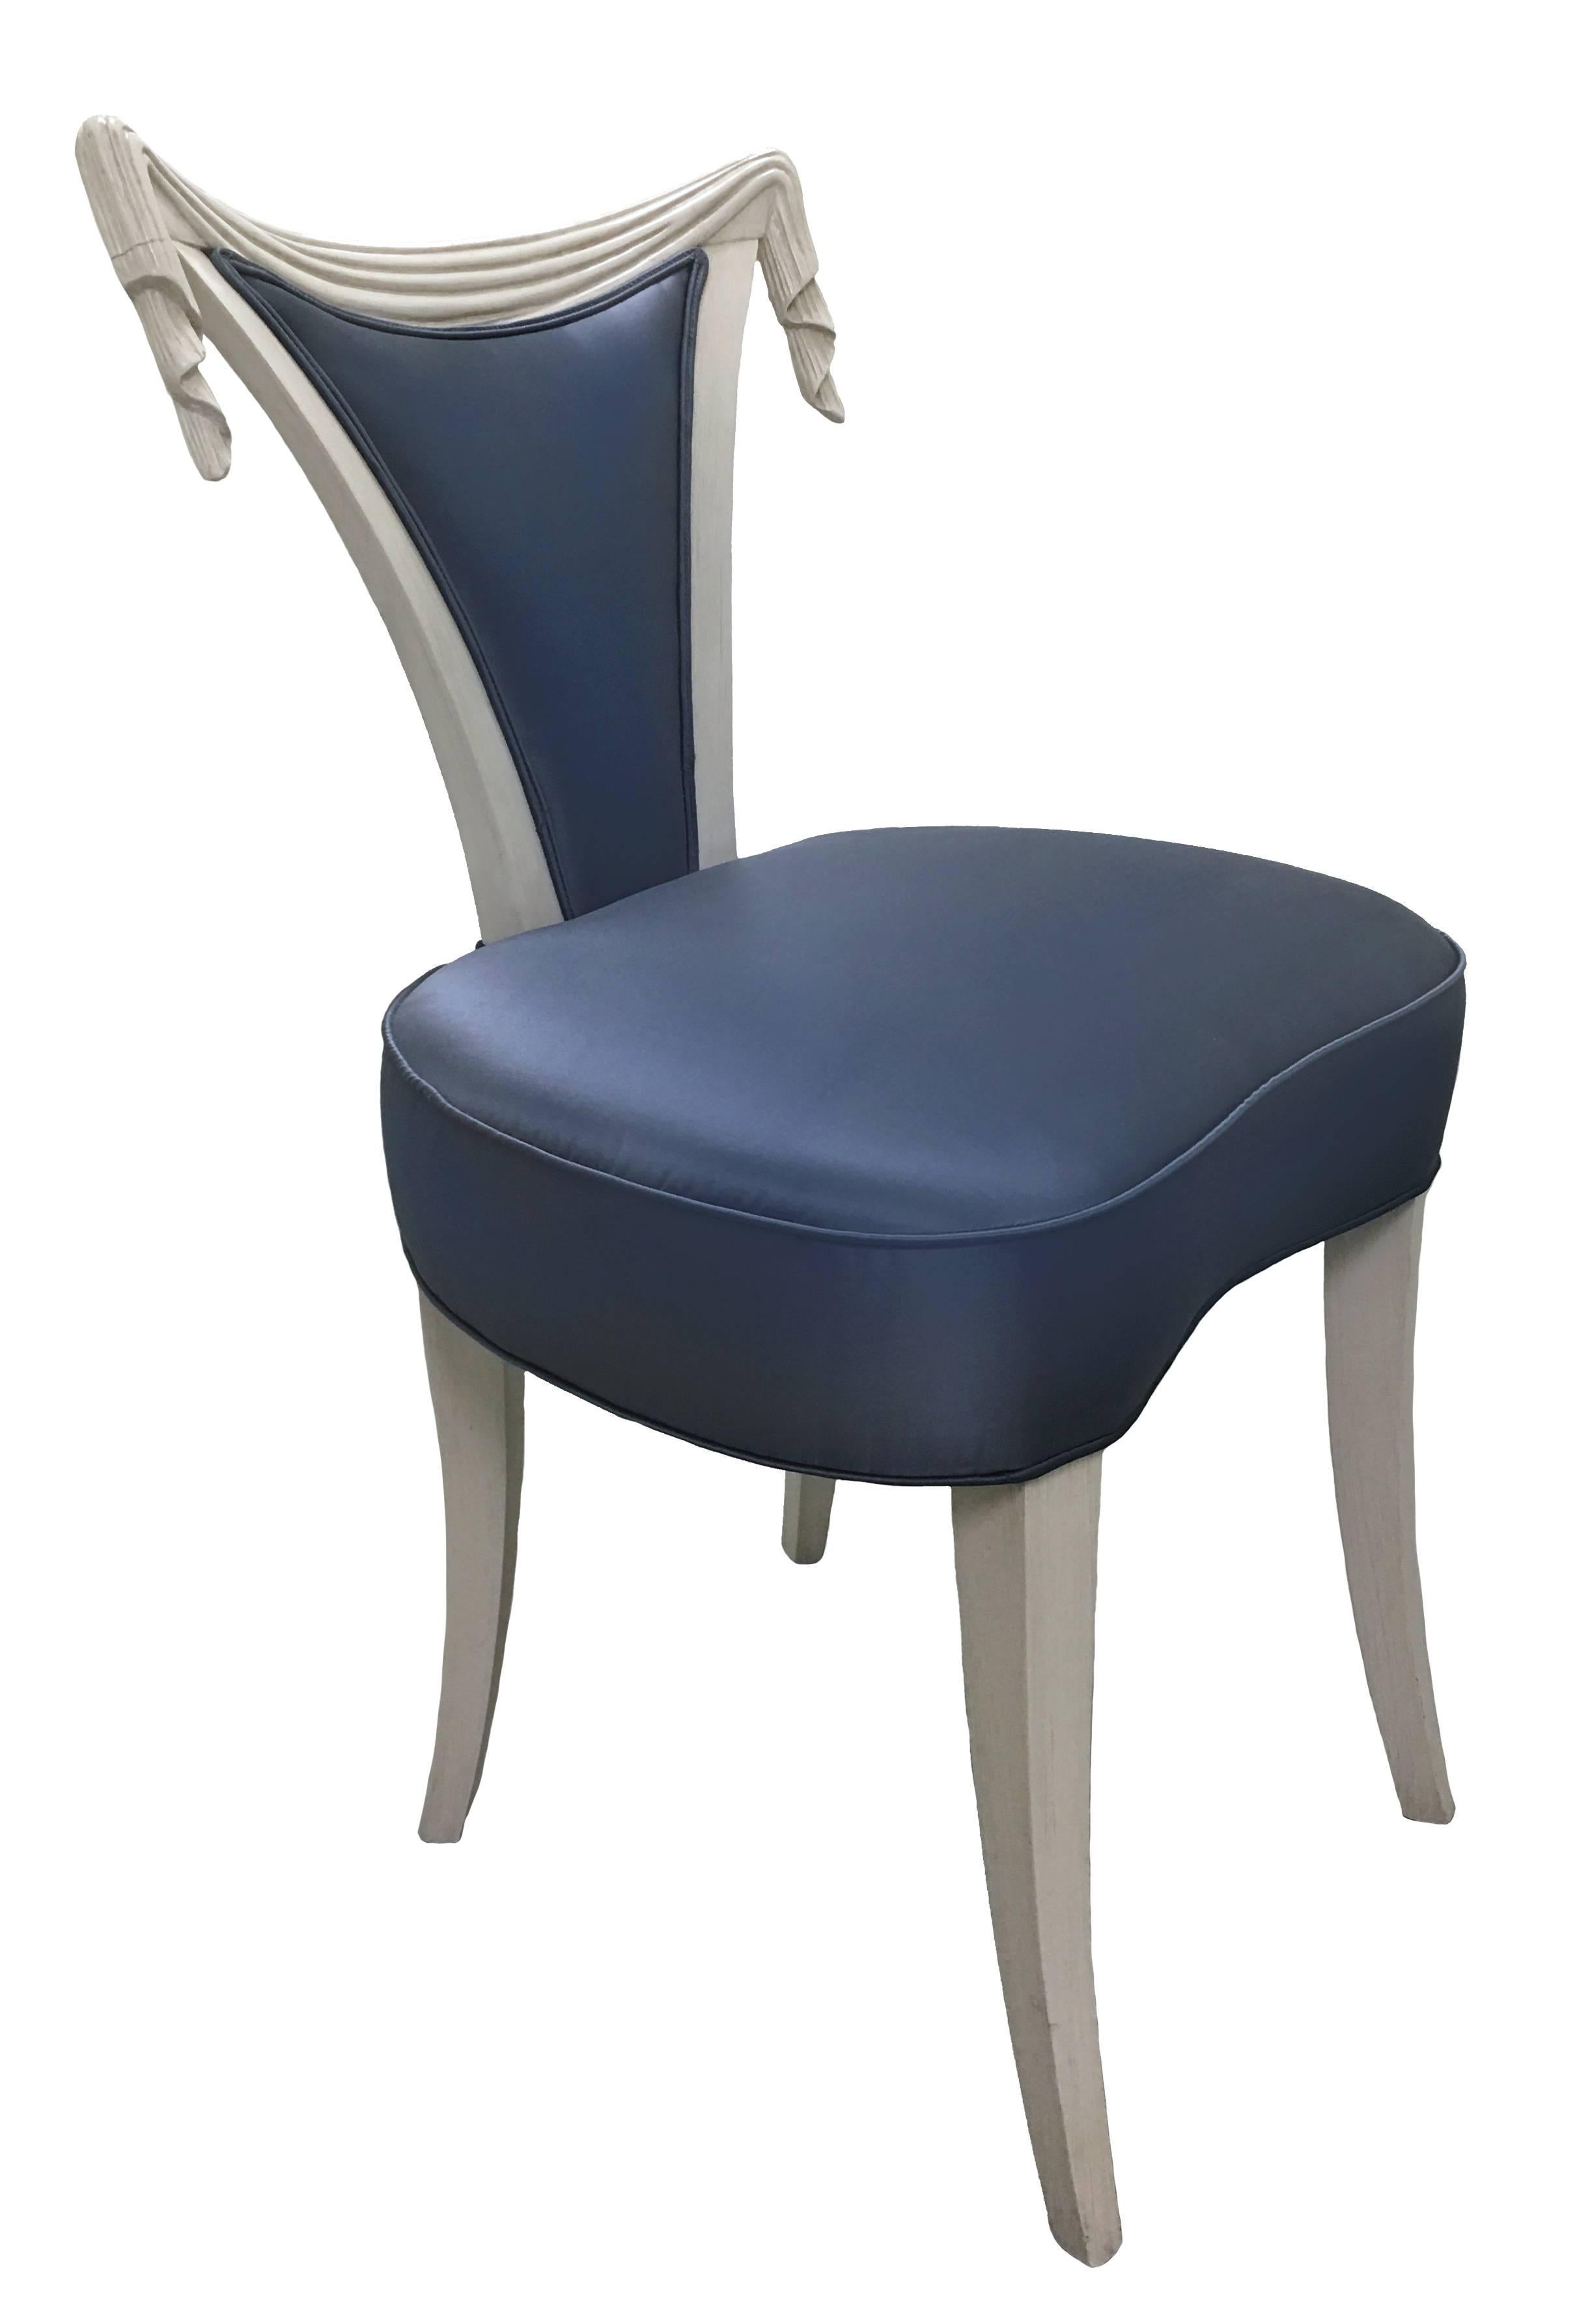 1940s Hollywood Regency style chair by Grosfeld House. Newly painted in an antique with faux finish. Newly upholstered in petrol blue silk fabric.